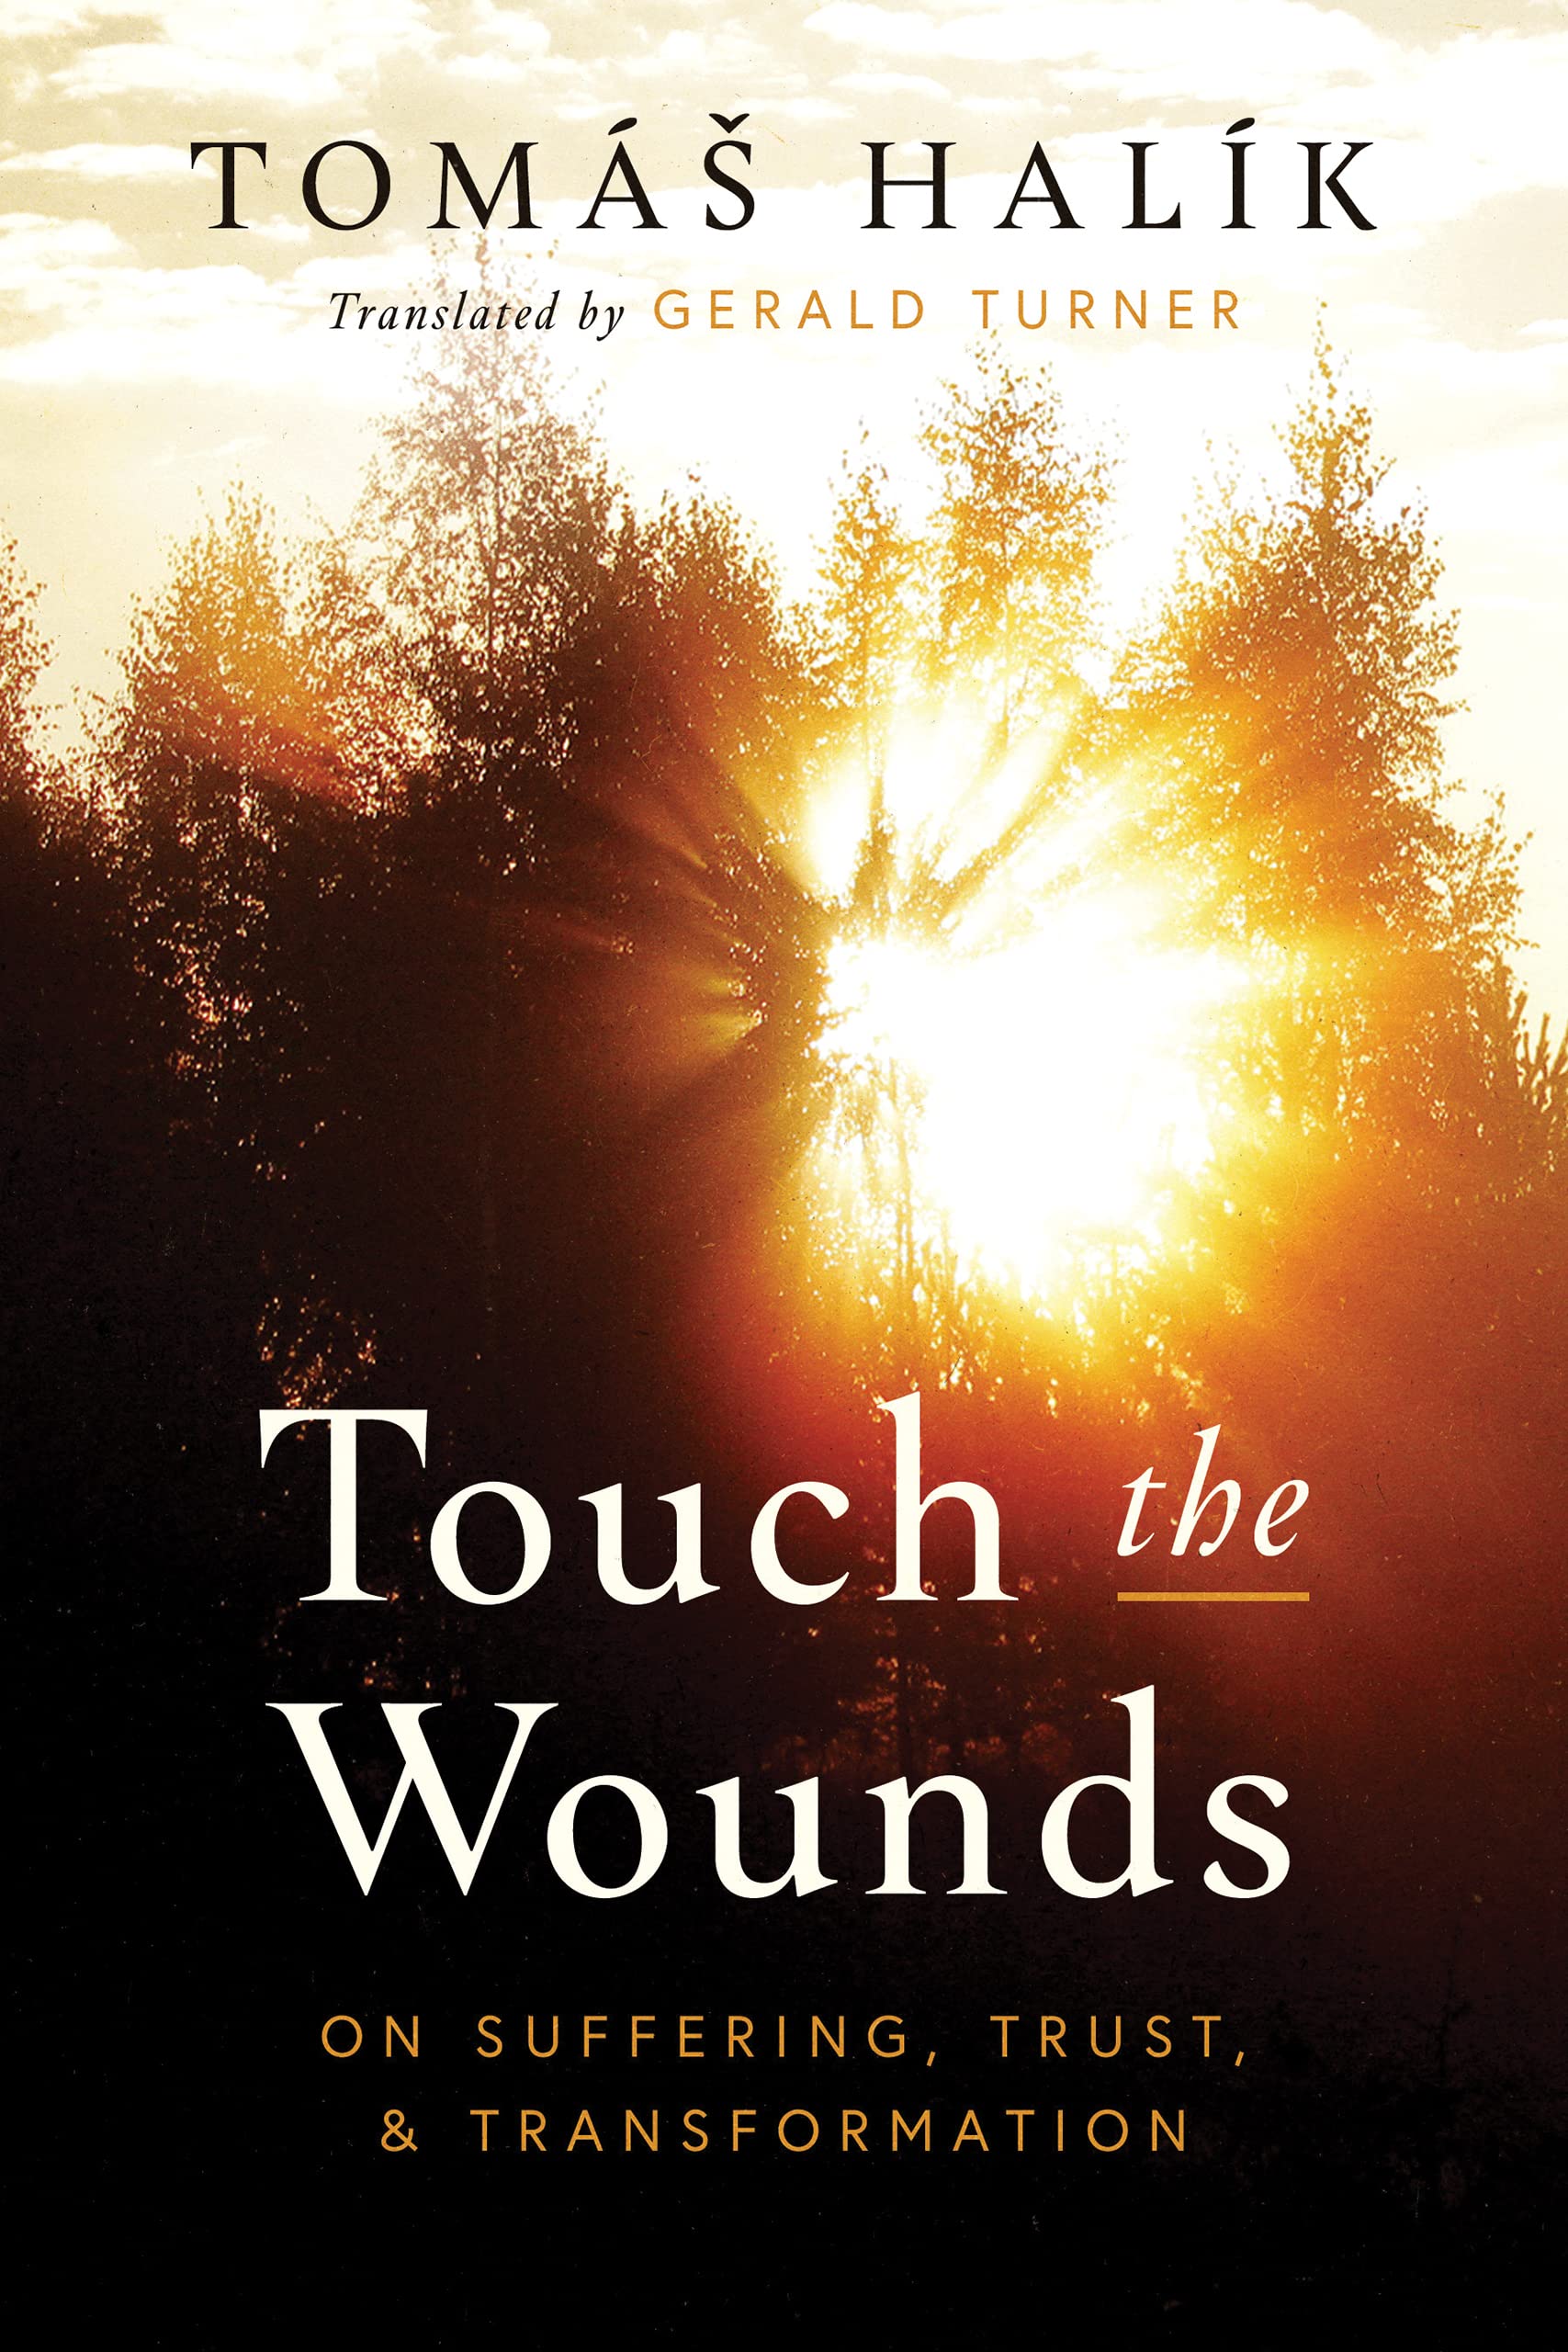 Book cover for "Touch the Wounds: On Suffering, Trust, and Transformation" by Tomas Halik